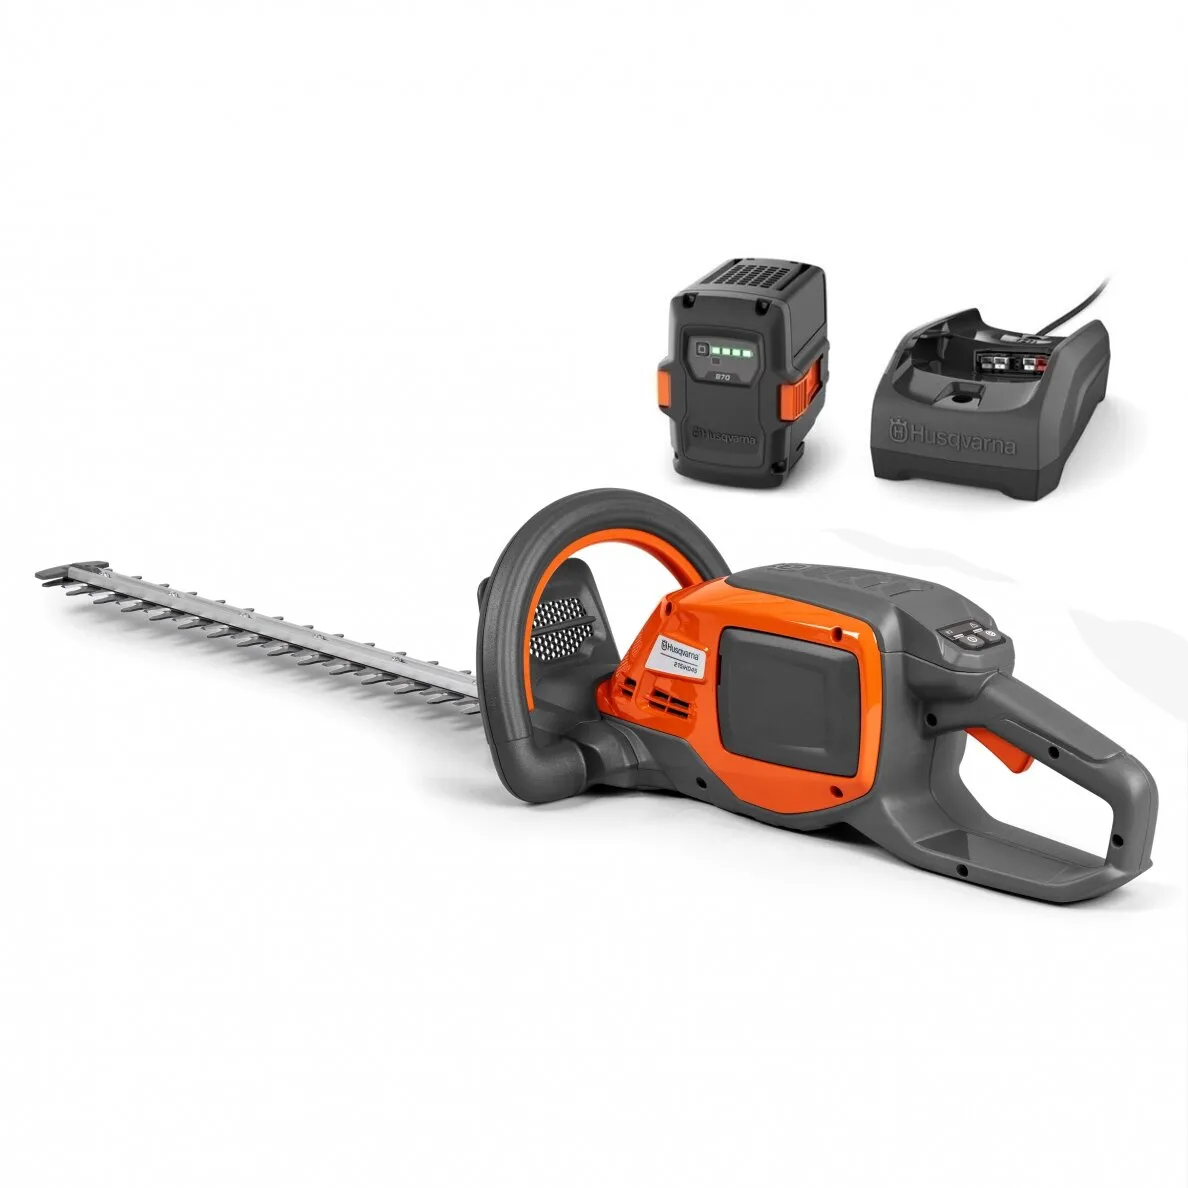 Husqvarna 215iHD45 Hedge Trimmer with battery and charger